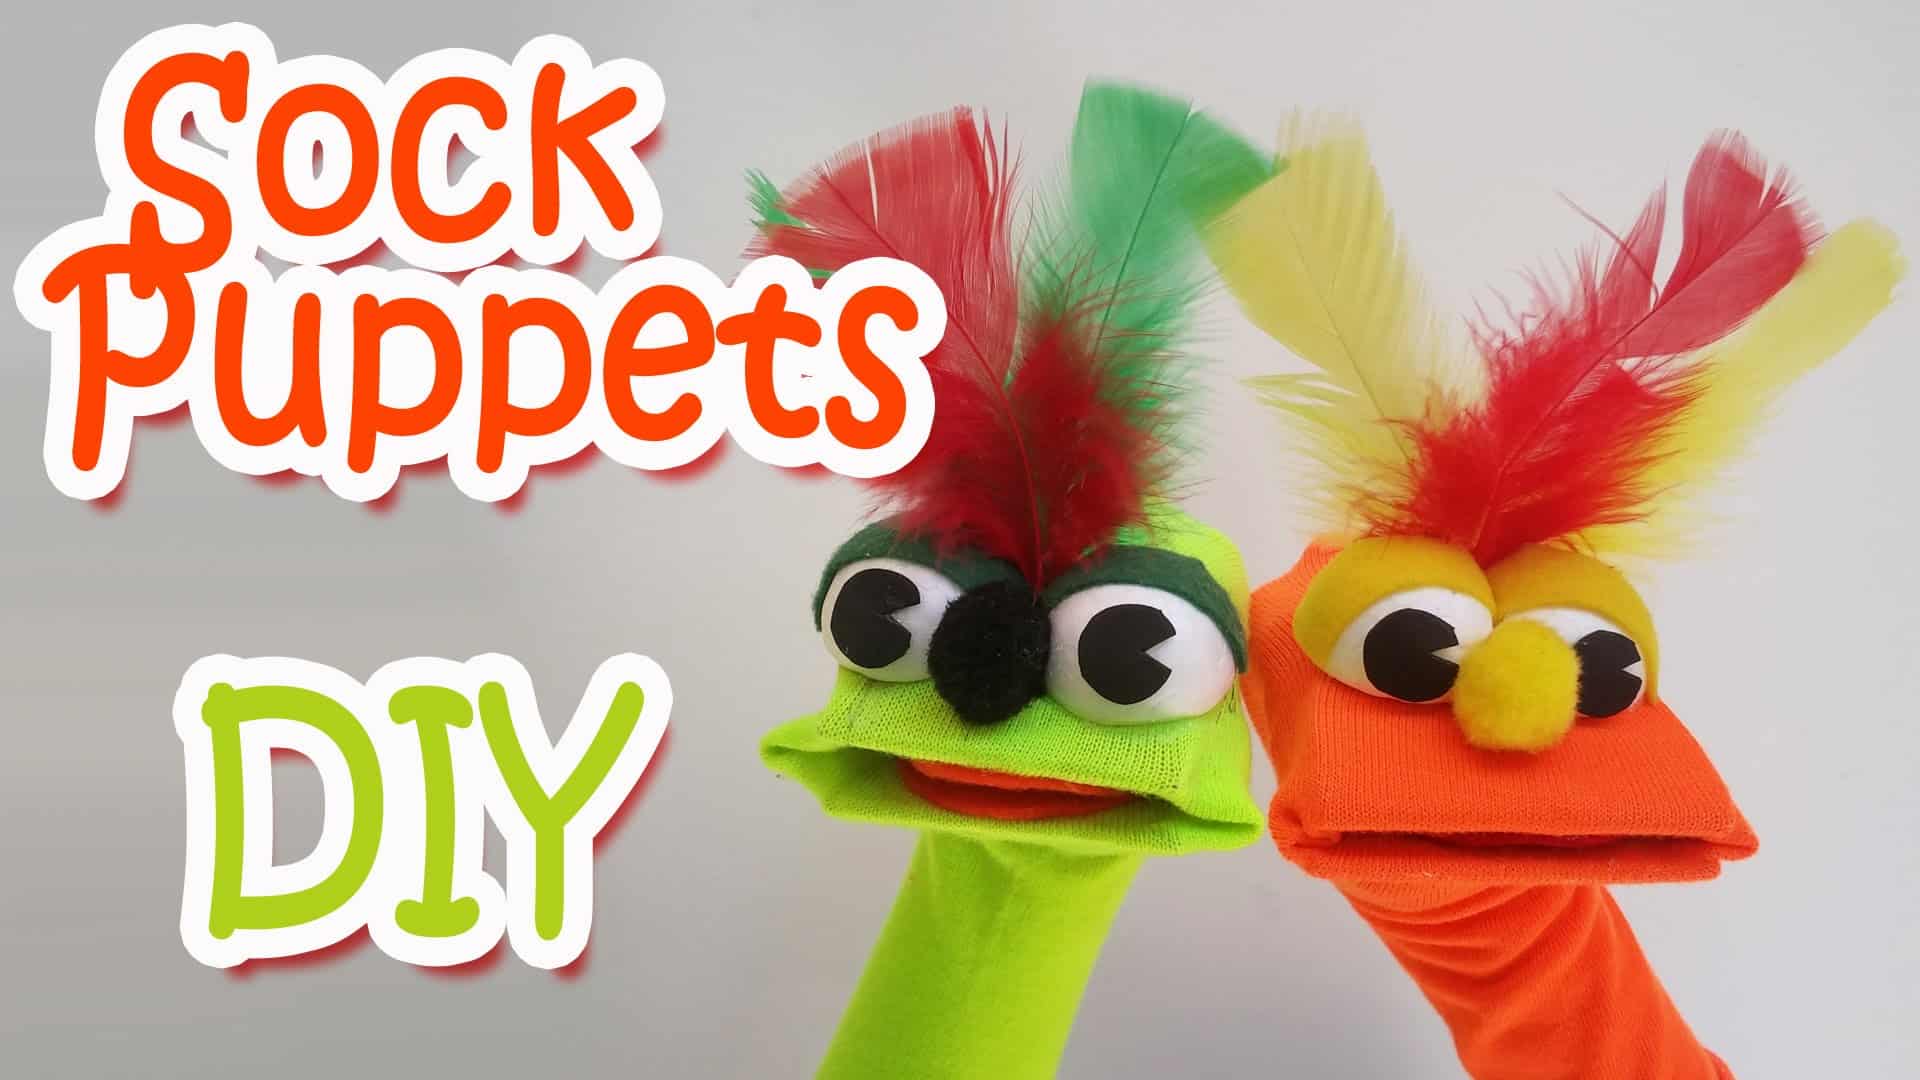 The best sock puppet project for kids of all ages!